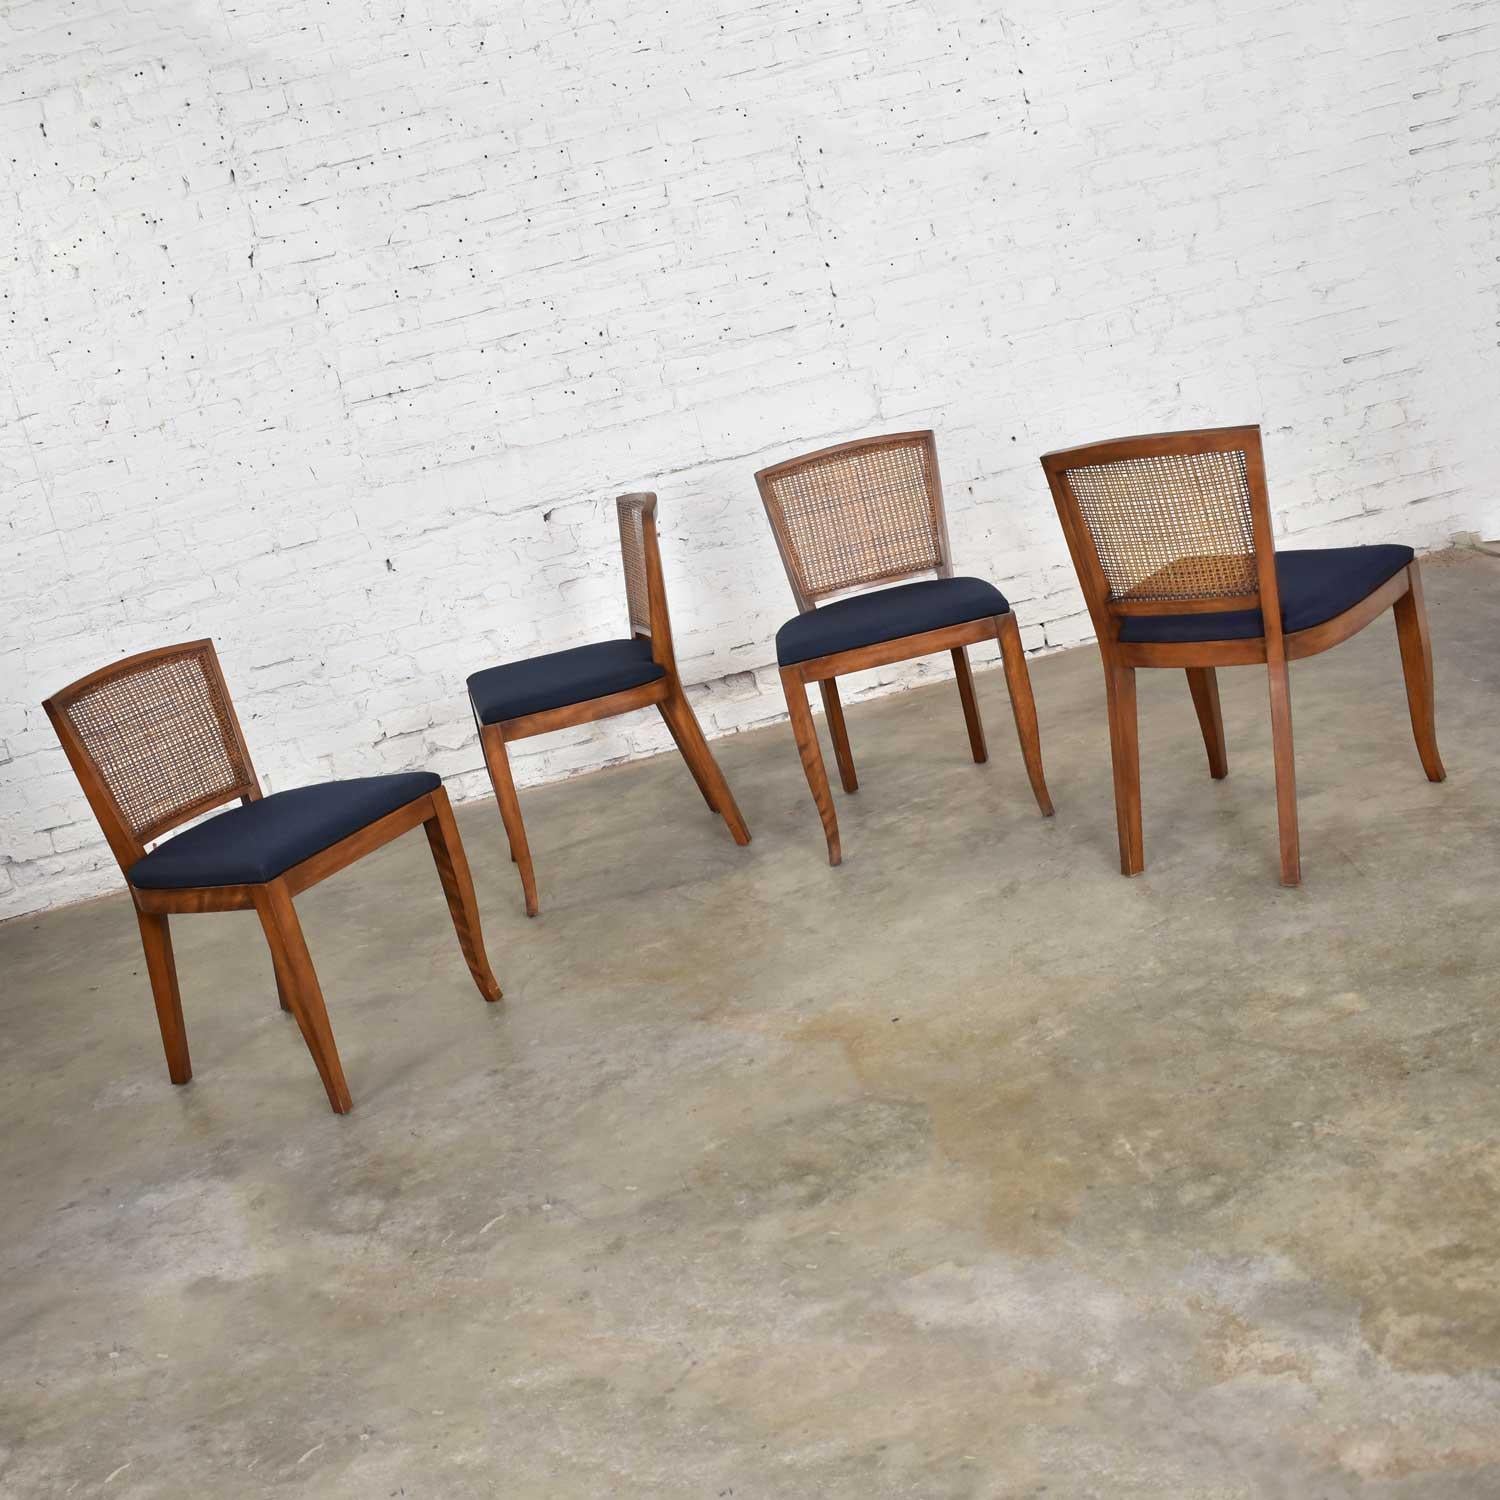 Vintage Mid-Century Modern Set of 4 Cane Back Dining Chairs Newly Upholstered 1